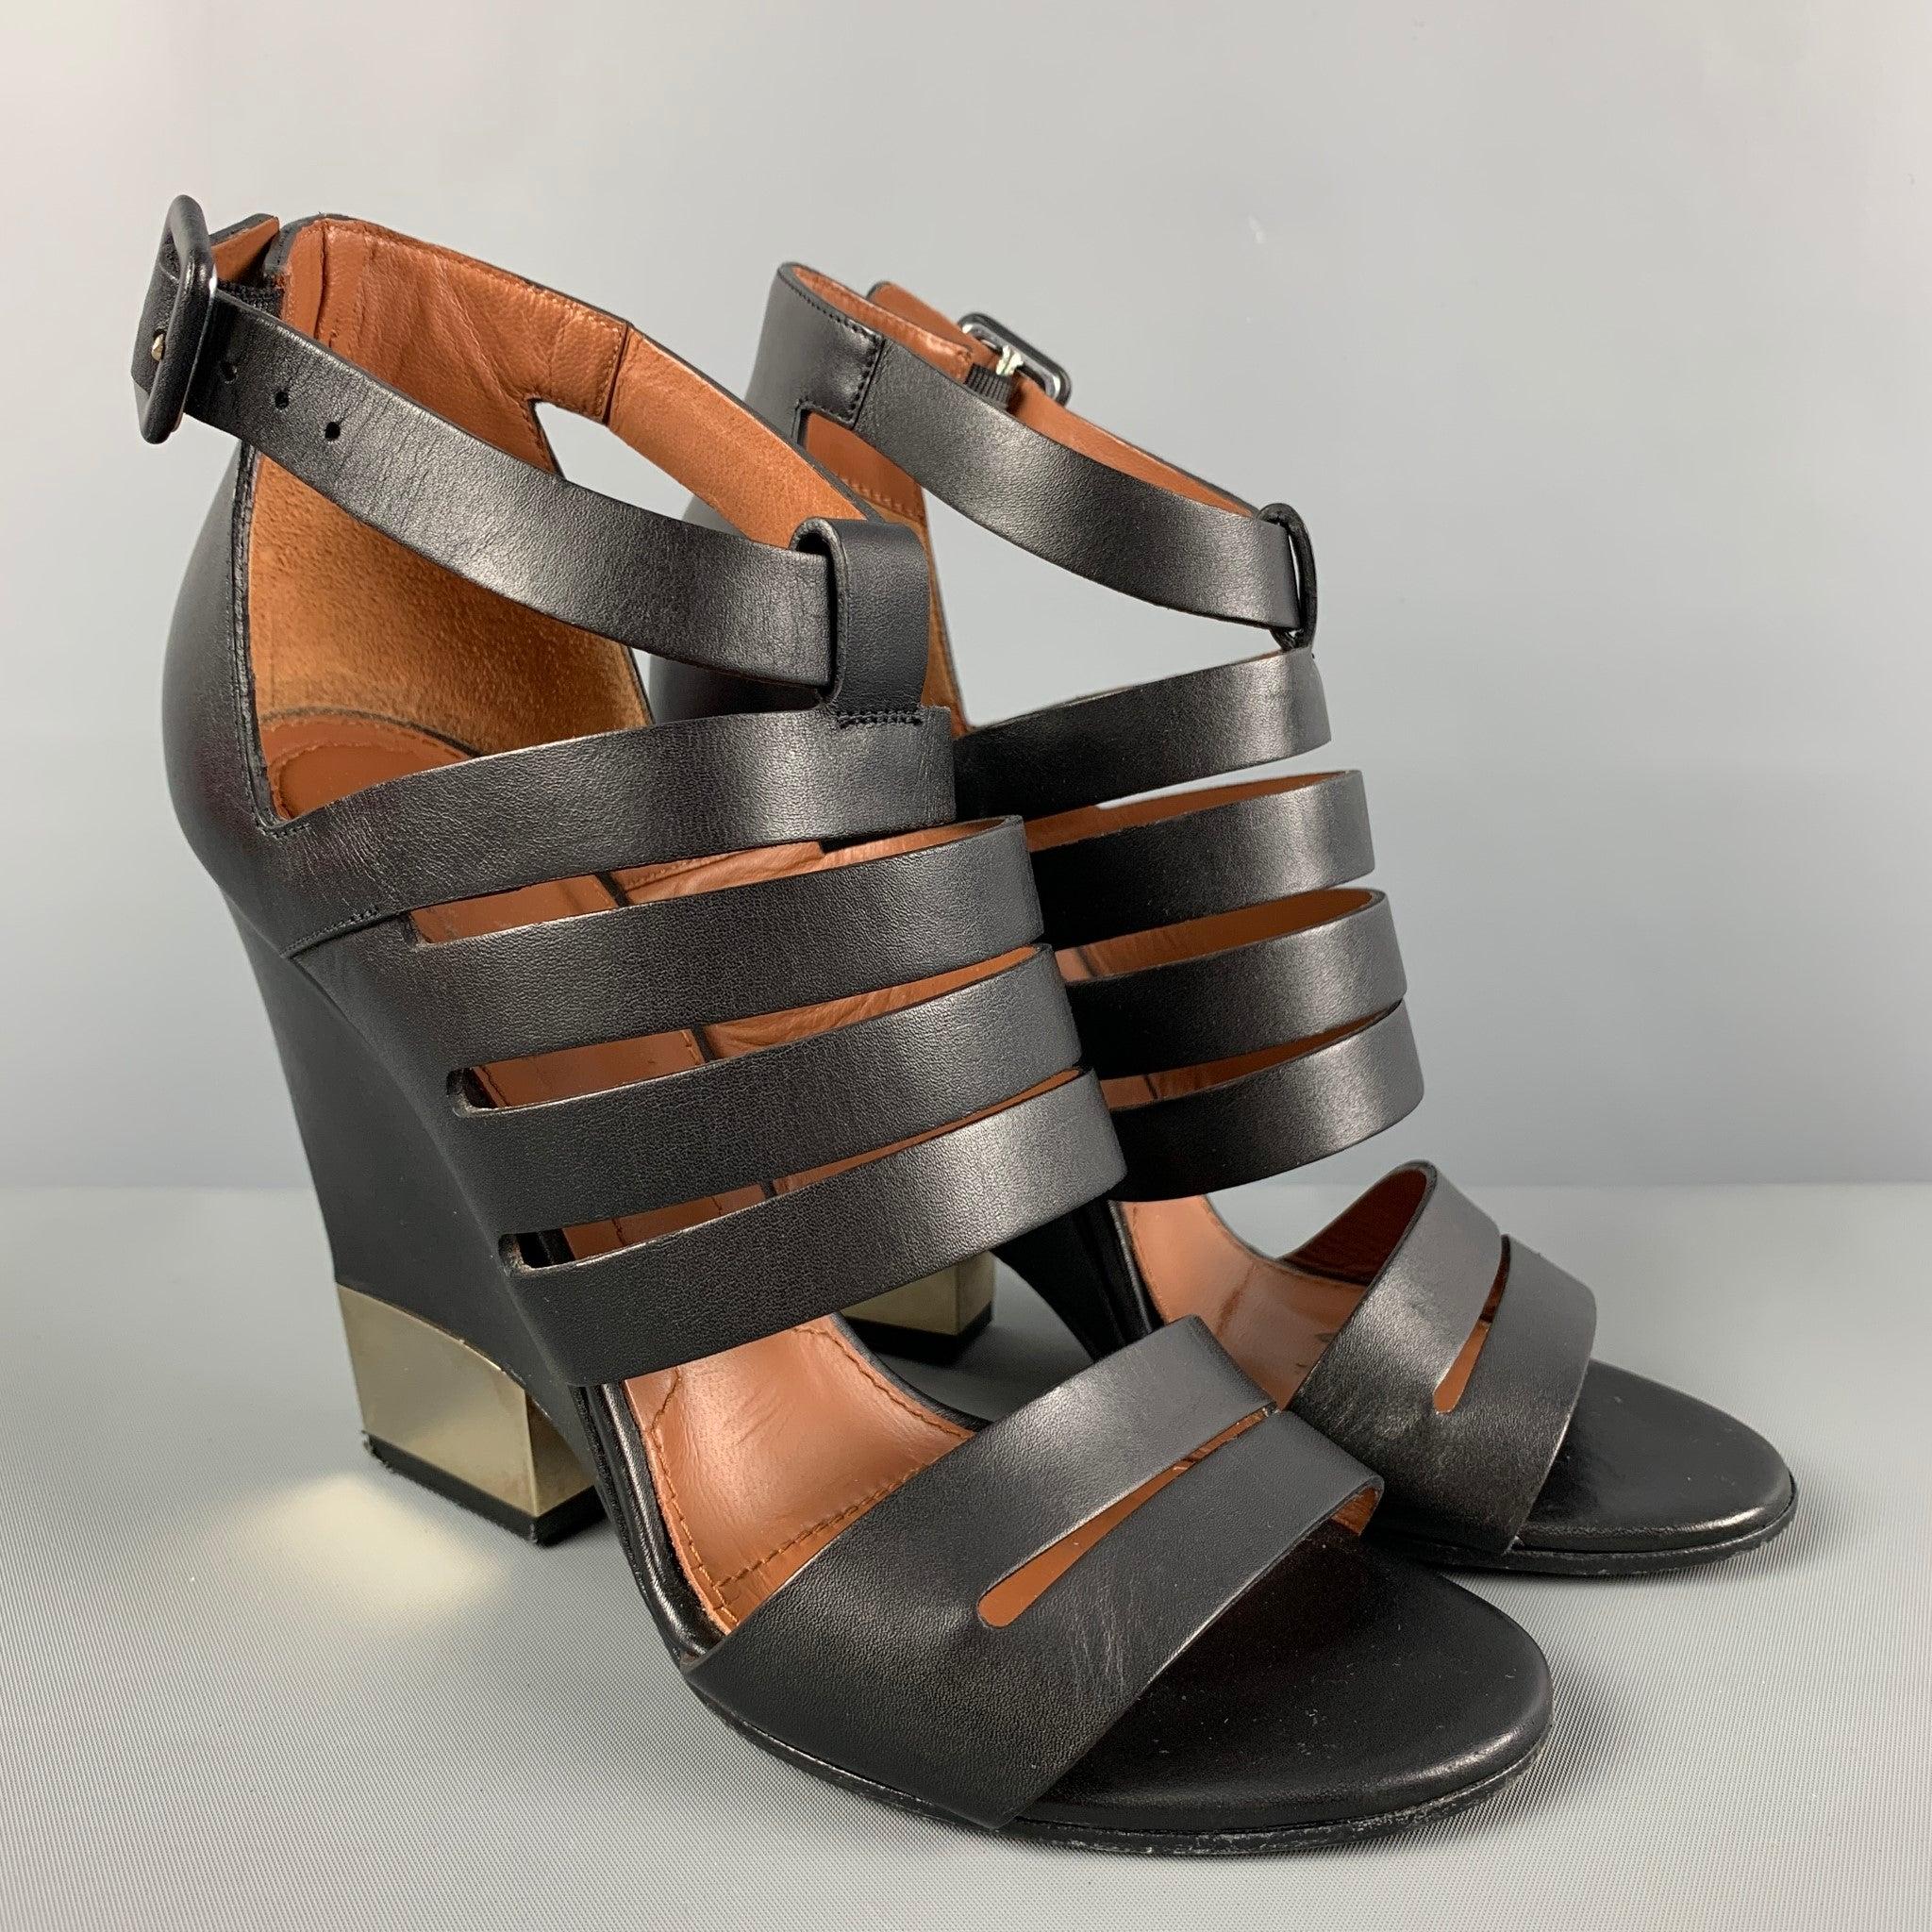 GIVENCHY heels comes in a black leather featuring a open toe, ankle strap closure, and a wedge heel with a metal detail.
 Good Pre-Owned Condition.
 Light wear. As-is.  
 

 Marked:  36.5 
 

 Measurements: 
  Heel:
 4 inches 
  
  
  
 Sui Generis